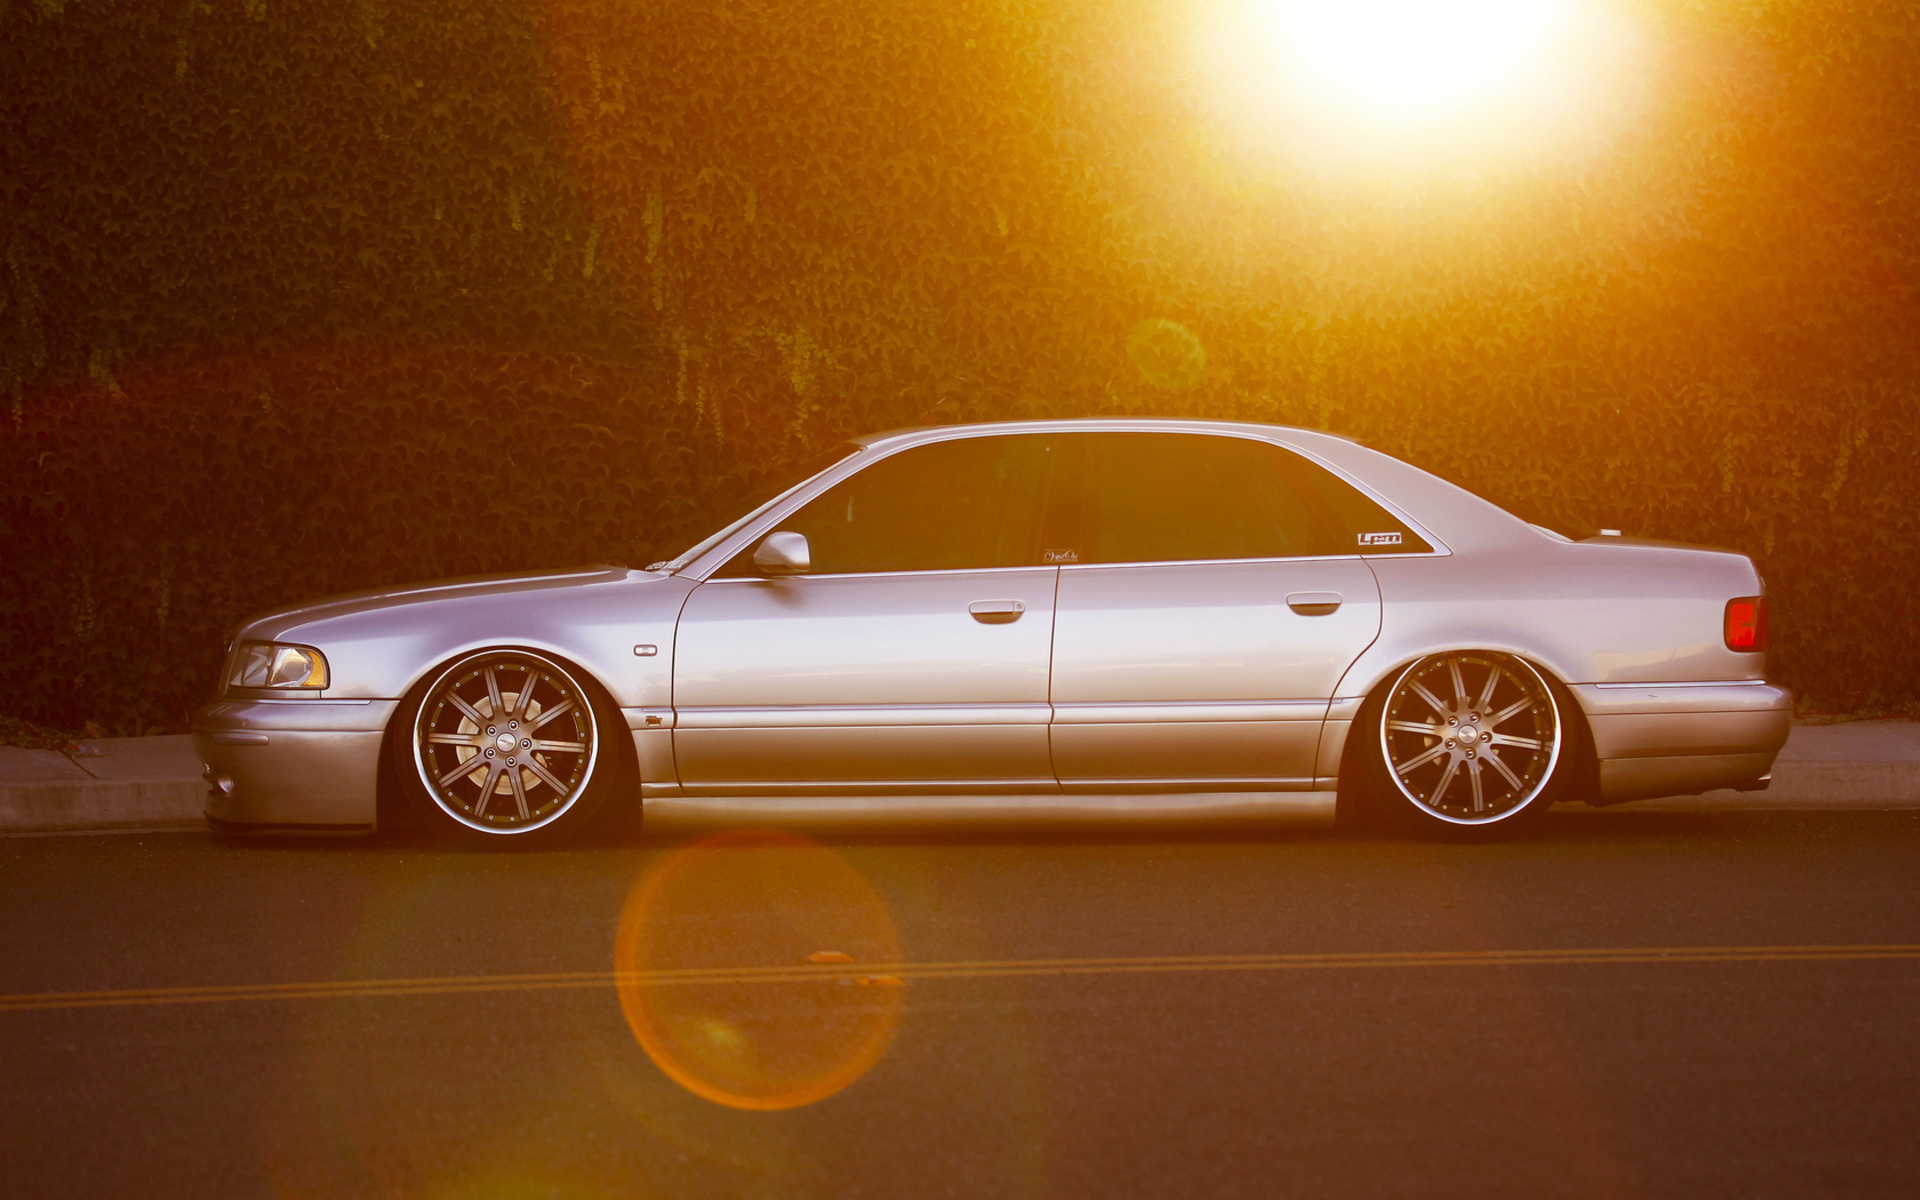 audi, Vehicles, Cars, Auto, Tuning, Stance, Import, Stance, Sunlight, Roads, Low, Sunset, Wheels Wallpaper